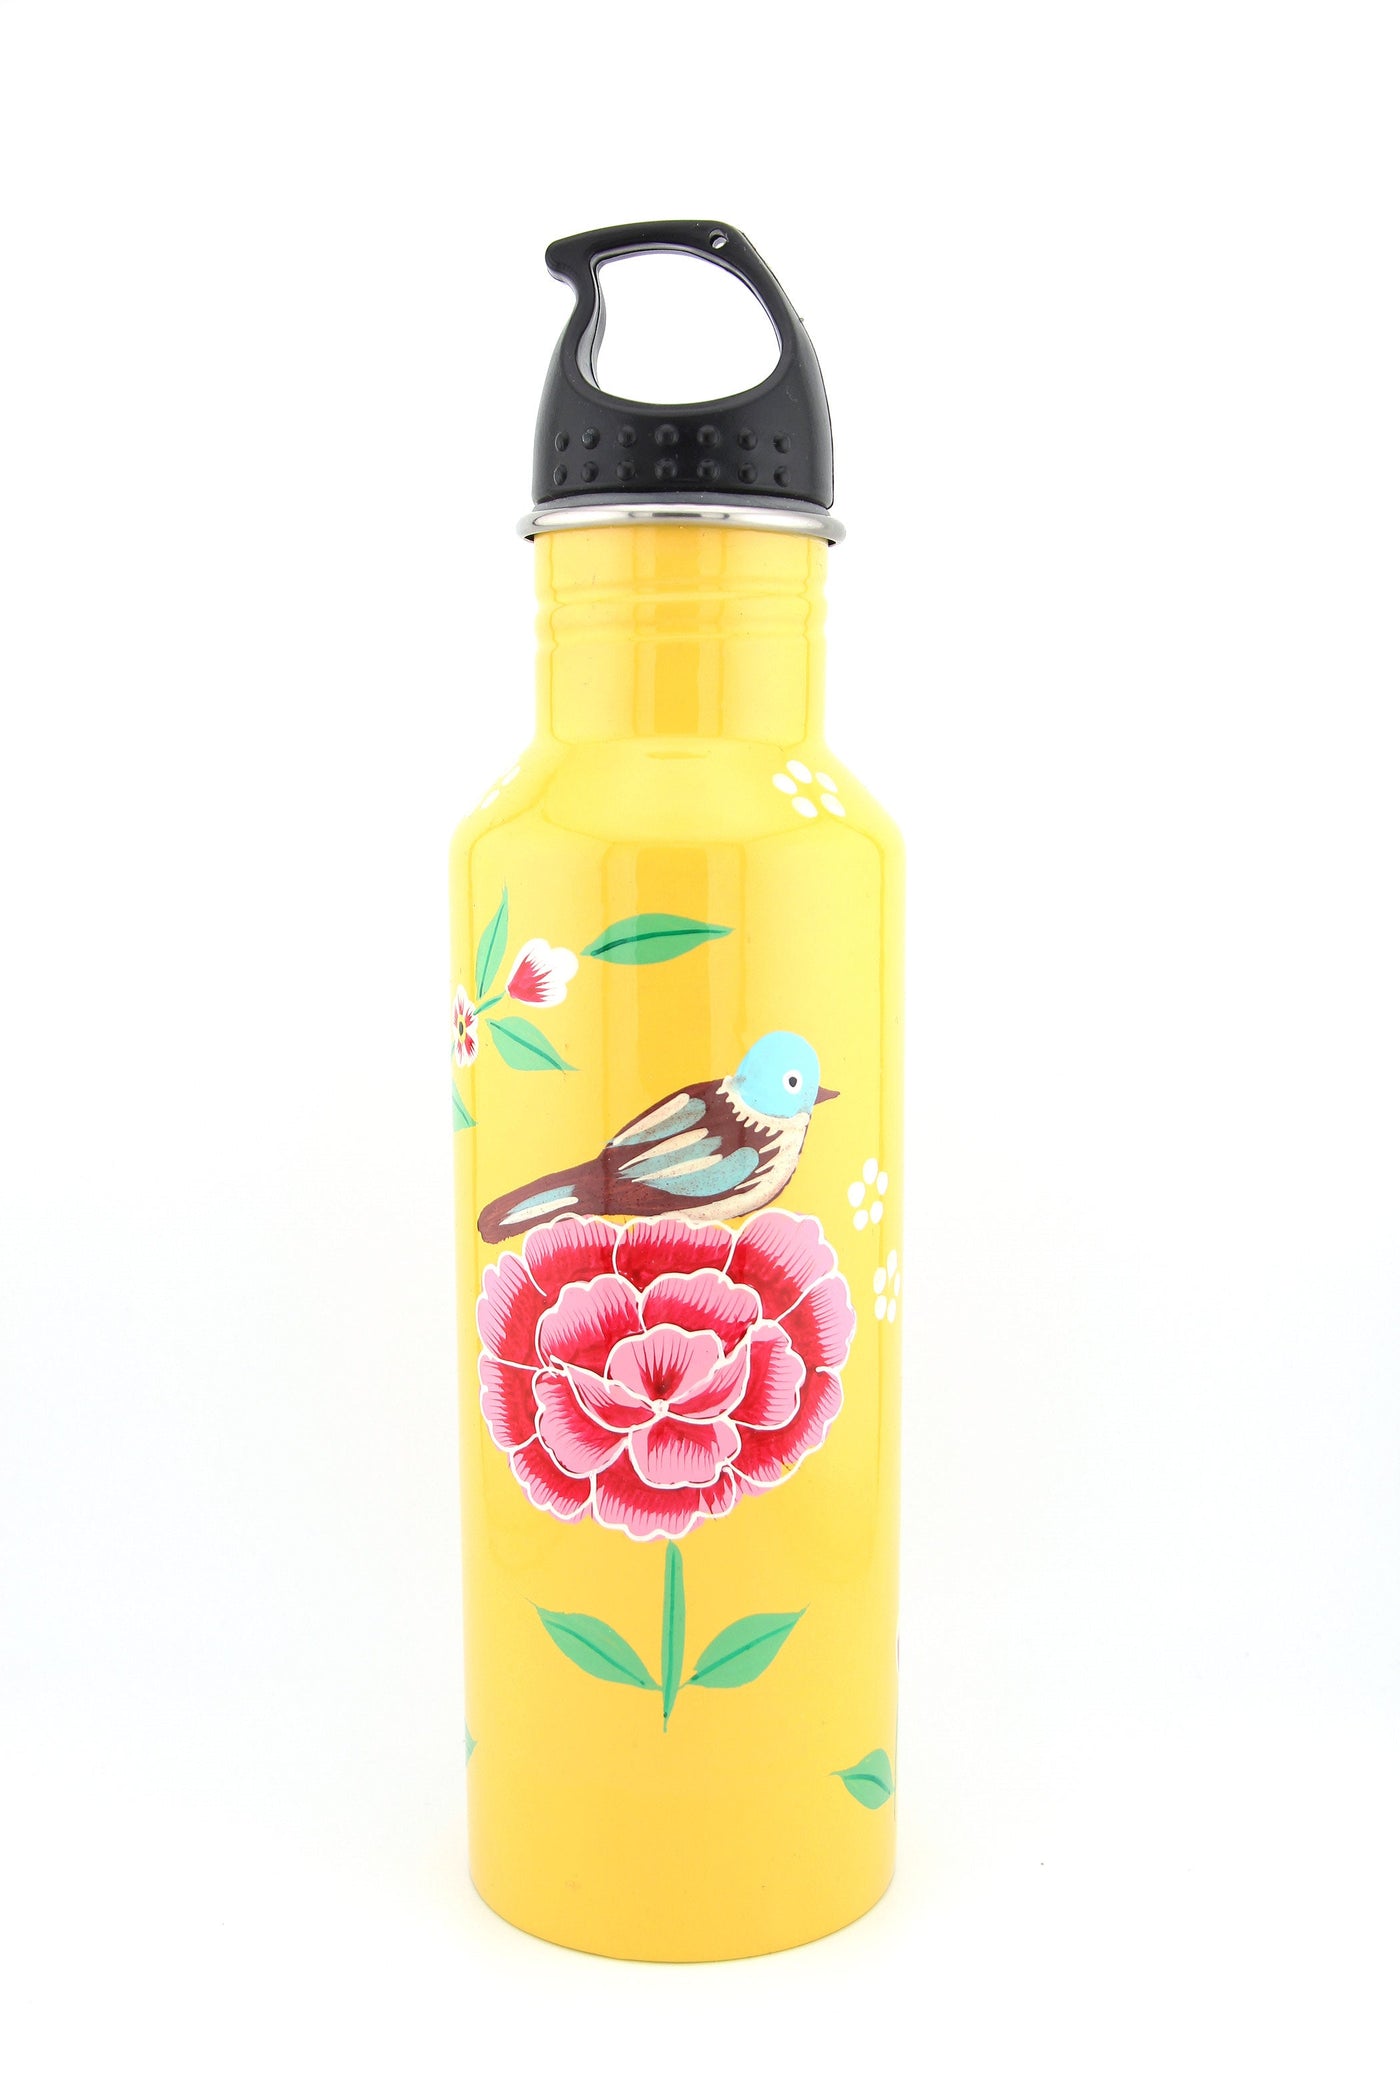 Floral Handpainted Stainless Steel Water Bottle from Kashmir